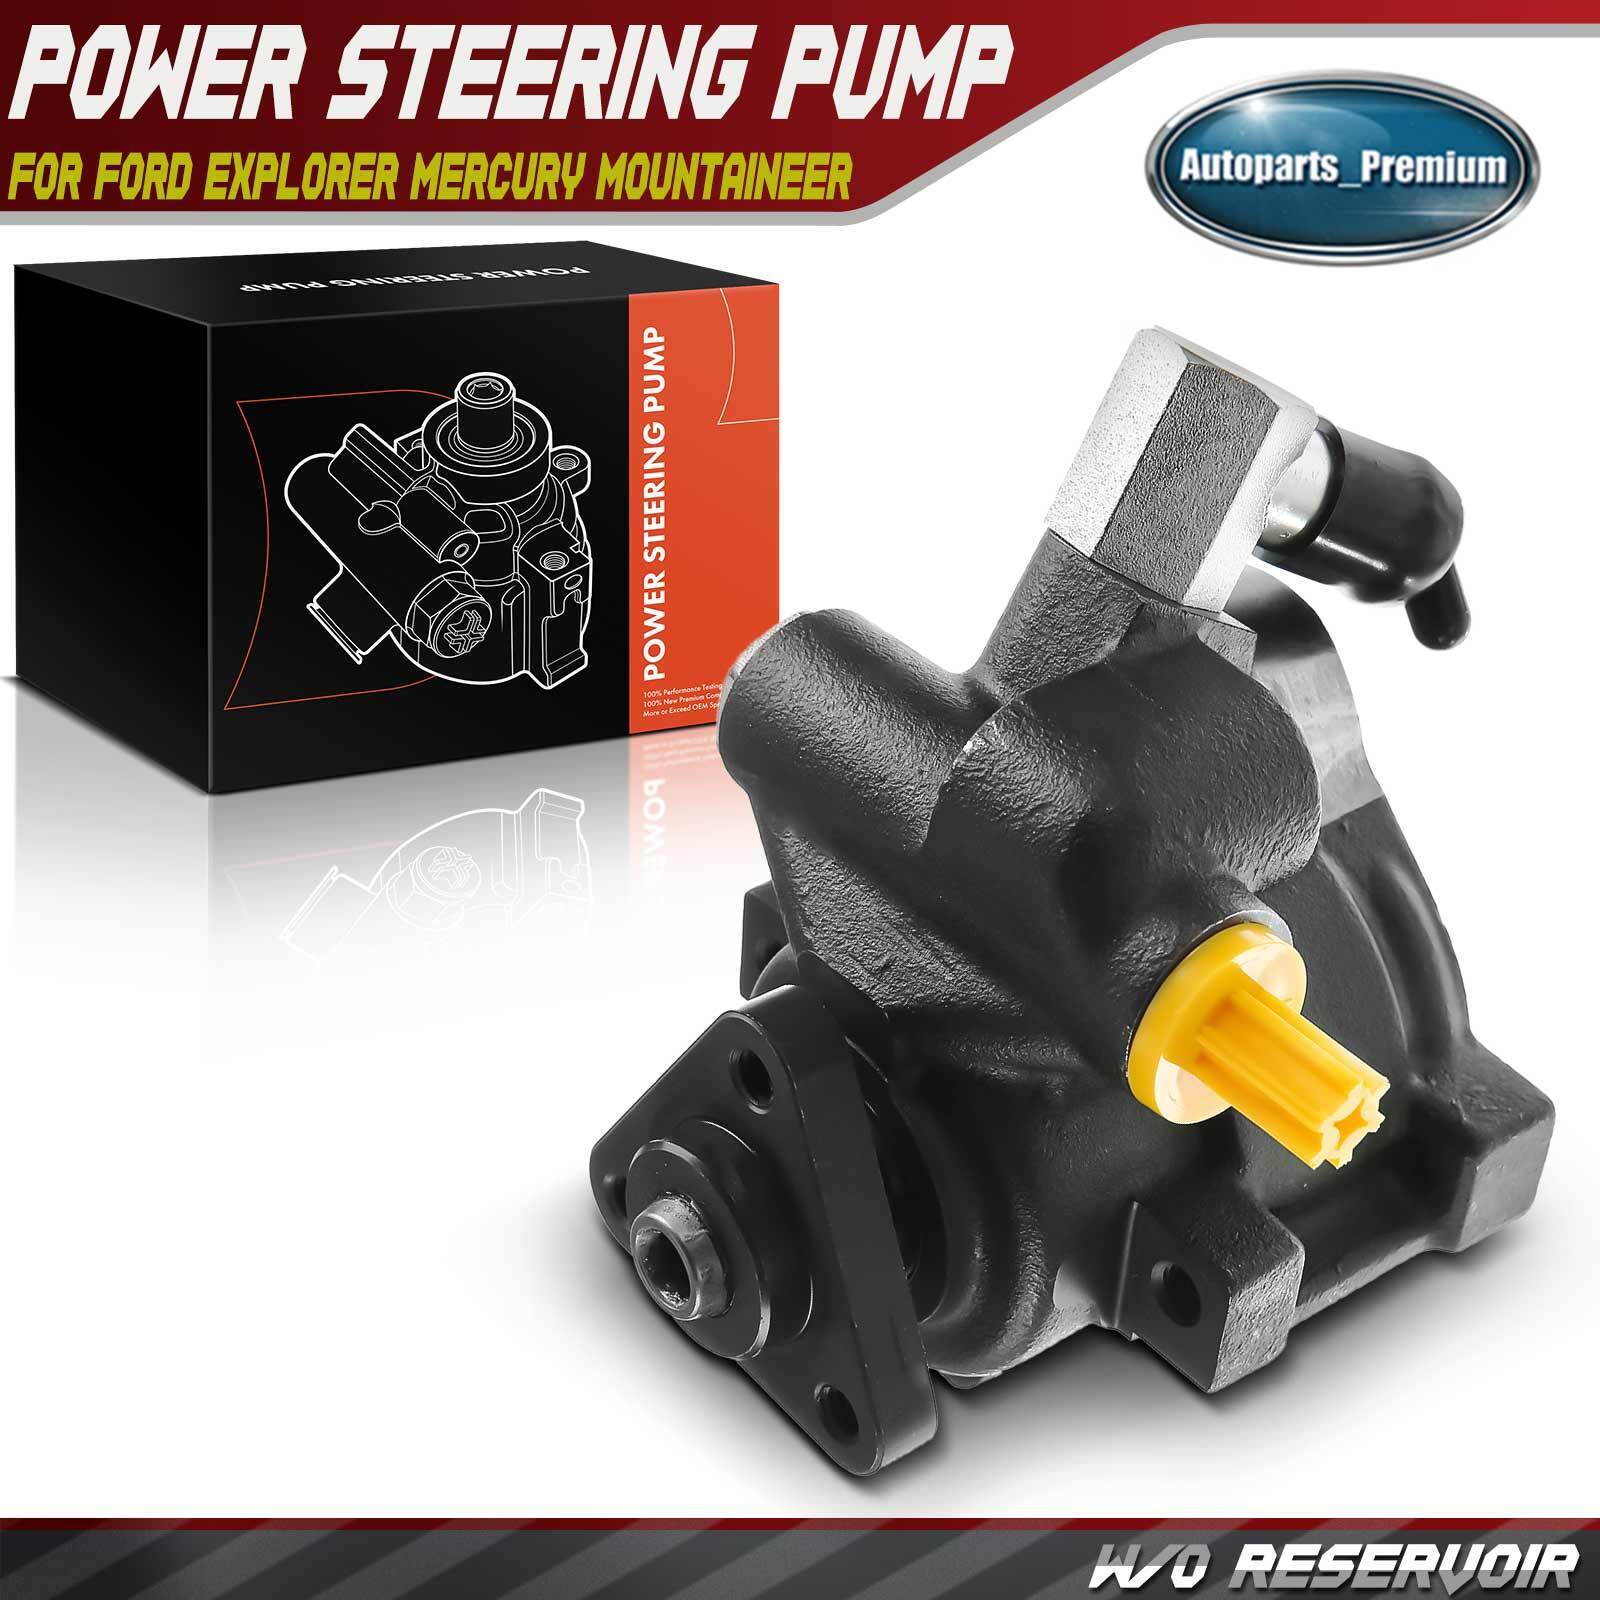 New Power Steering Pump for Ford Explorer & Mercury Mountaineer 5.0L 1997-2001